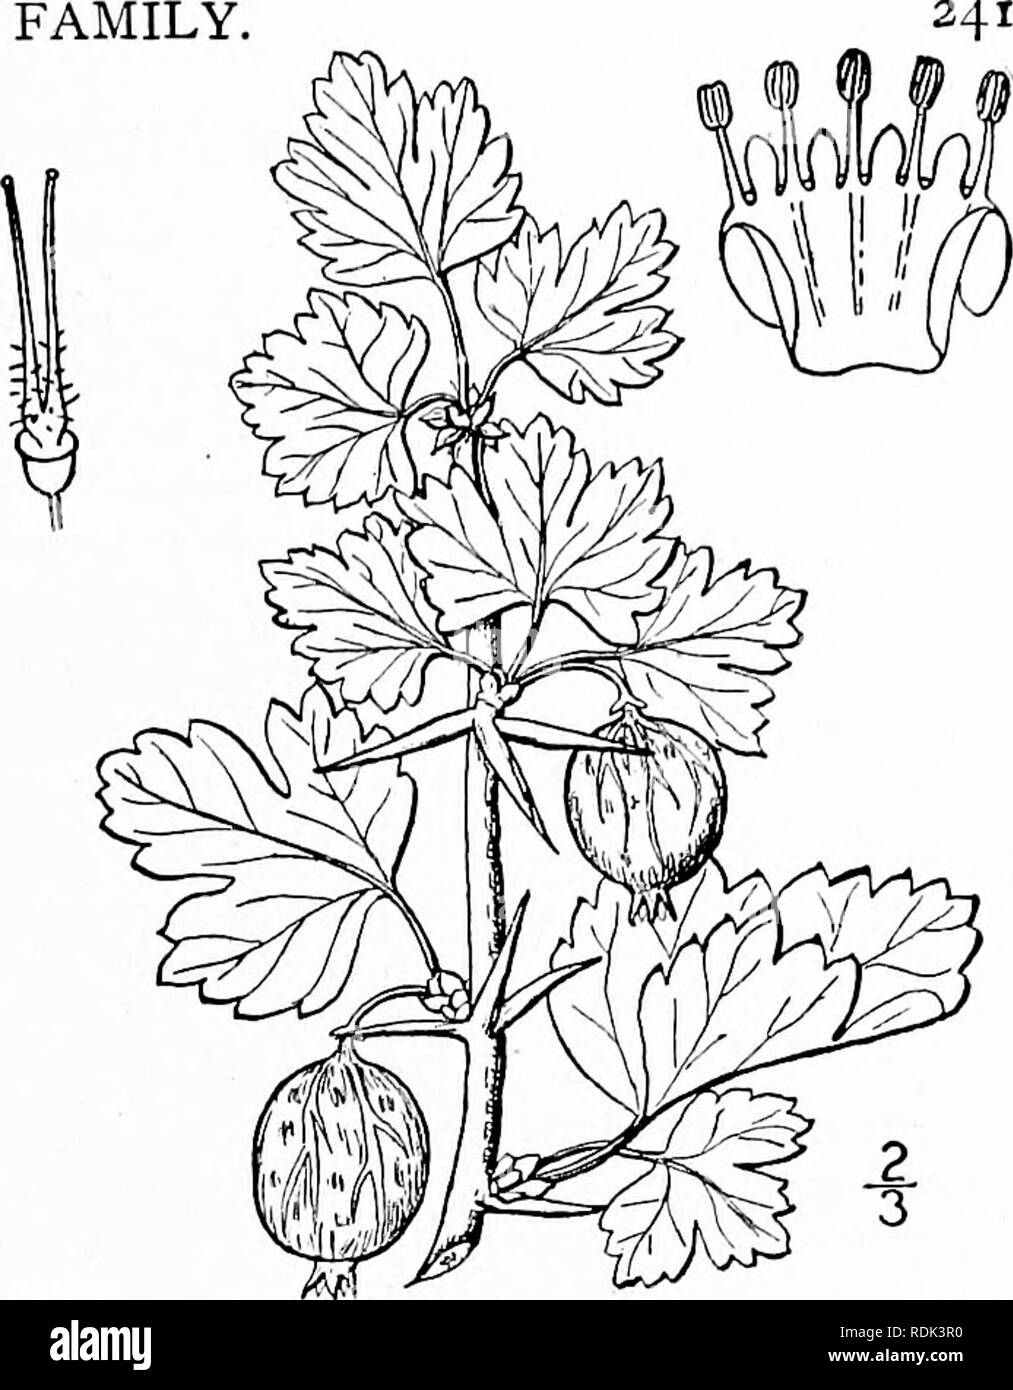 . An illustrated flora of the northern United States, Canada and the British possessions, from Newfoundland to the parallel of the southern boundary of Virginia, and from the Atlantic Ocean westward to the 102d meridian. Botany; Botany. Genus 2. GOOSEBERRY FAMILY. 5. Grossularia reclinata (L.) Mill. Garden Gooseberry. Fig. 2209. Ribes rccUnatiiin L. Sp. PI. 201, 1753. Ribes Uva-crispa L. Sp. PI. 201. 1753. Ribes Grossularia L. Sp. PI. 201. 1753. G. reclinata Mill. Gard. Diet. Ed. 8, No. 4. 1768. Nodal spines stout, spreading or reflexed, usually 3 together but sometimes solitary or 2. Prickles Stock Photo